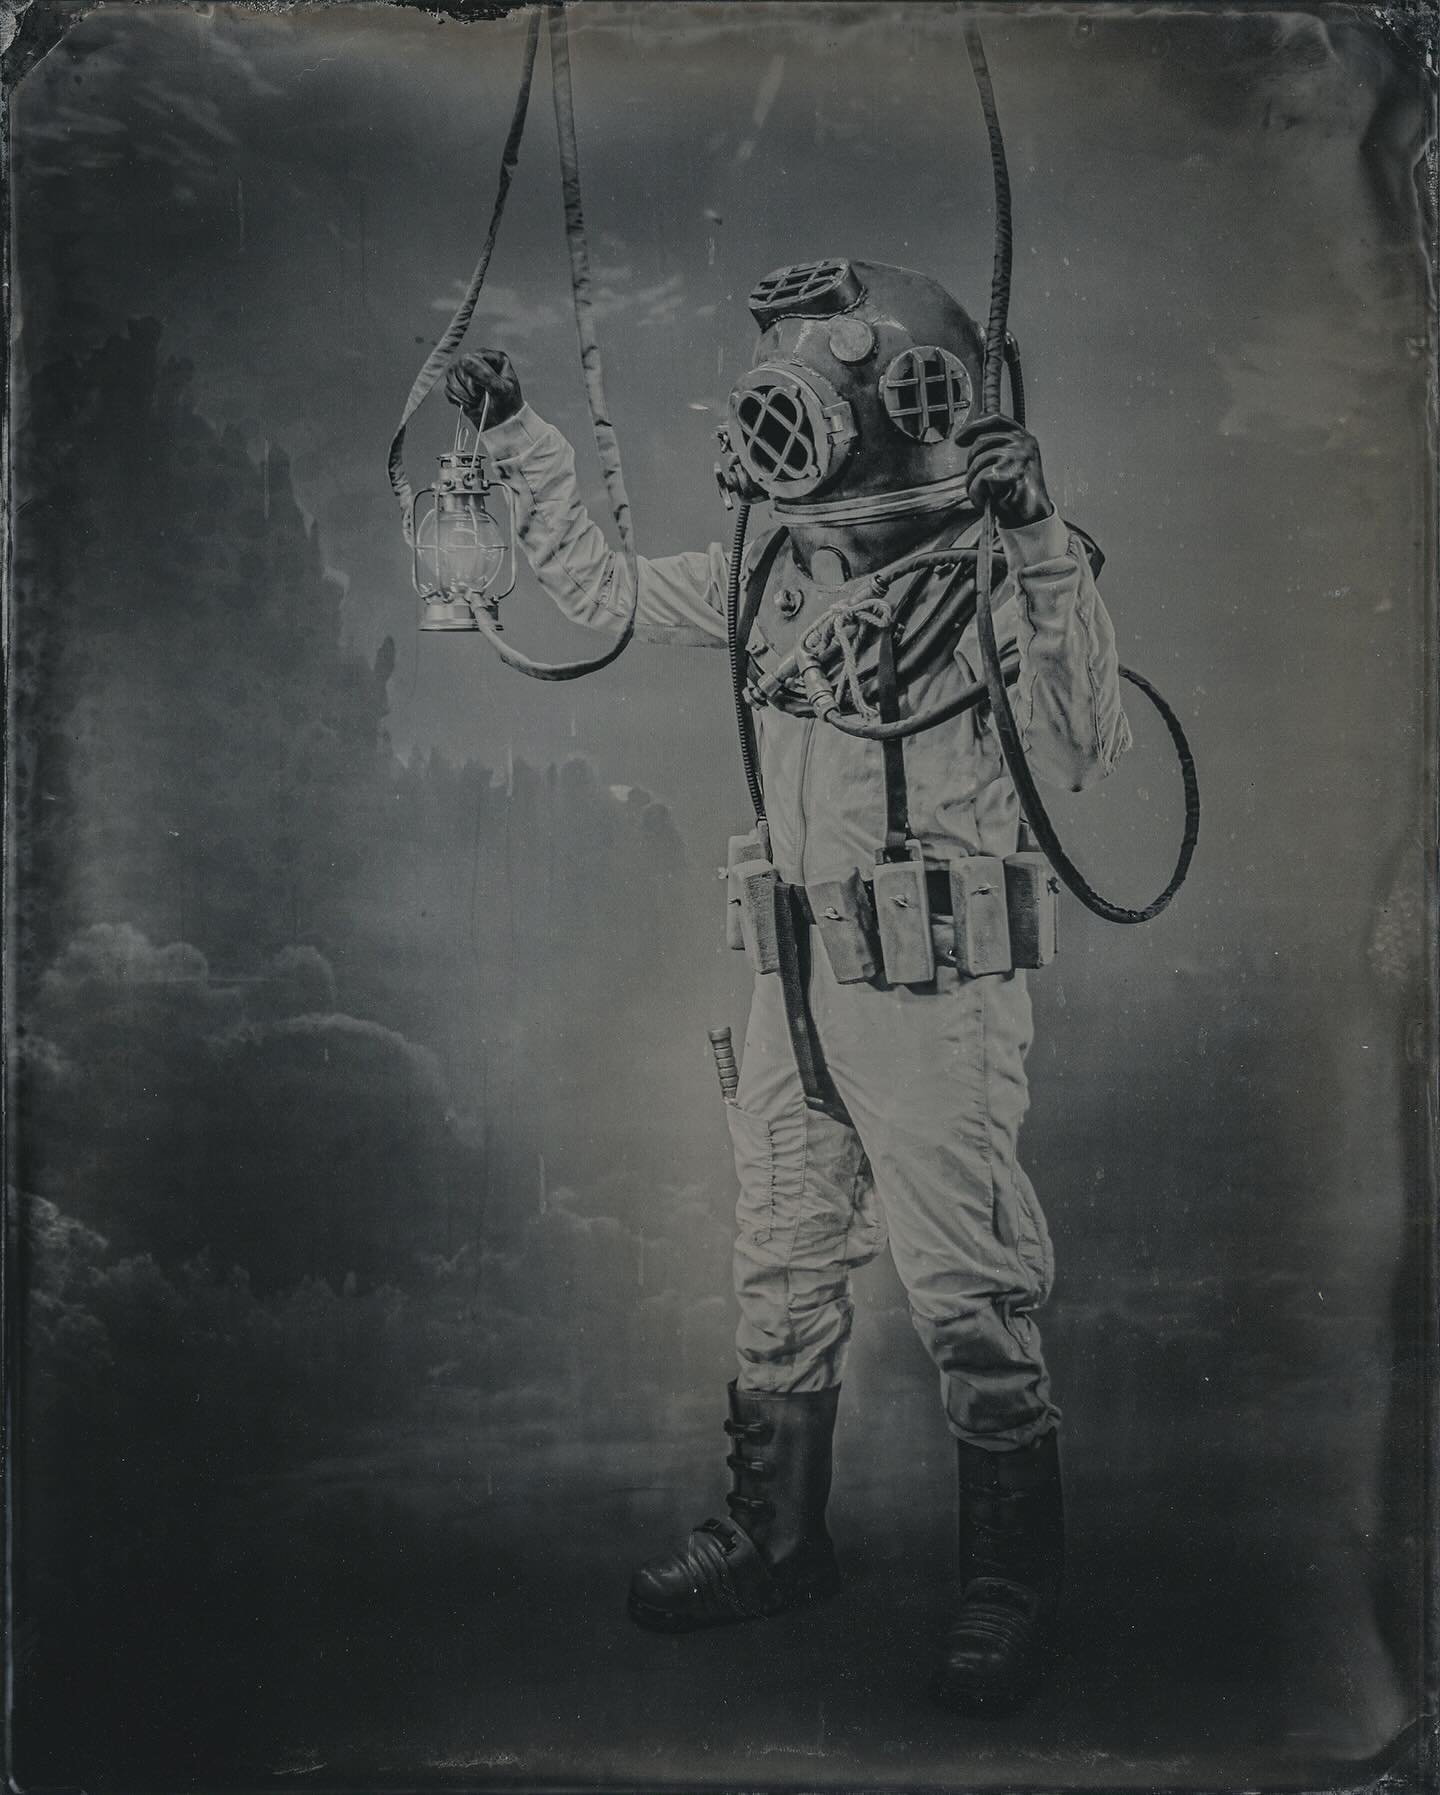 The Hermit

8x10 Wet Plate Collodion. 

As I have worked through this series of Archetypes some of those images take a not insignificant amount of reflection to arrive at, while others just come fully formed. This was one of the latter. 

#wetplateco